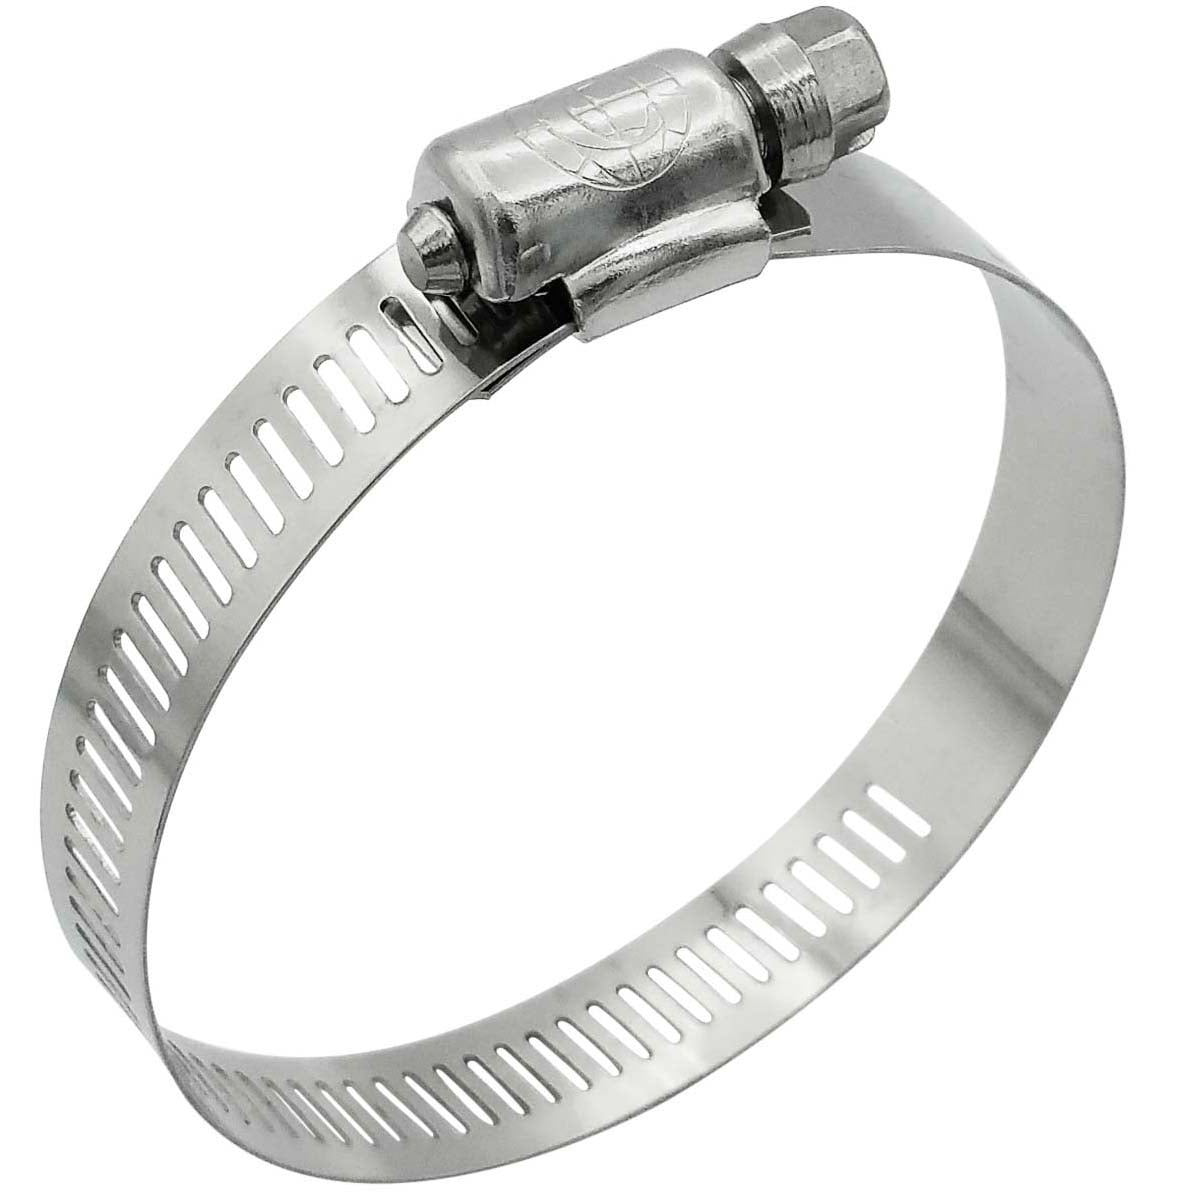 Stainless Steel Worm Gear Clamp-Size:3 inch 